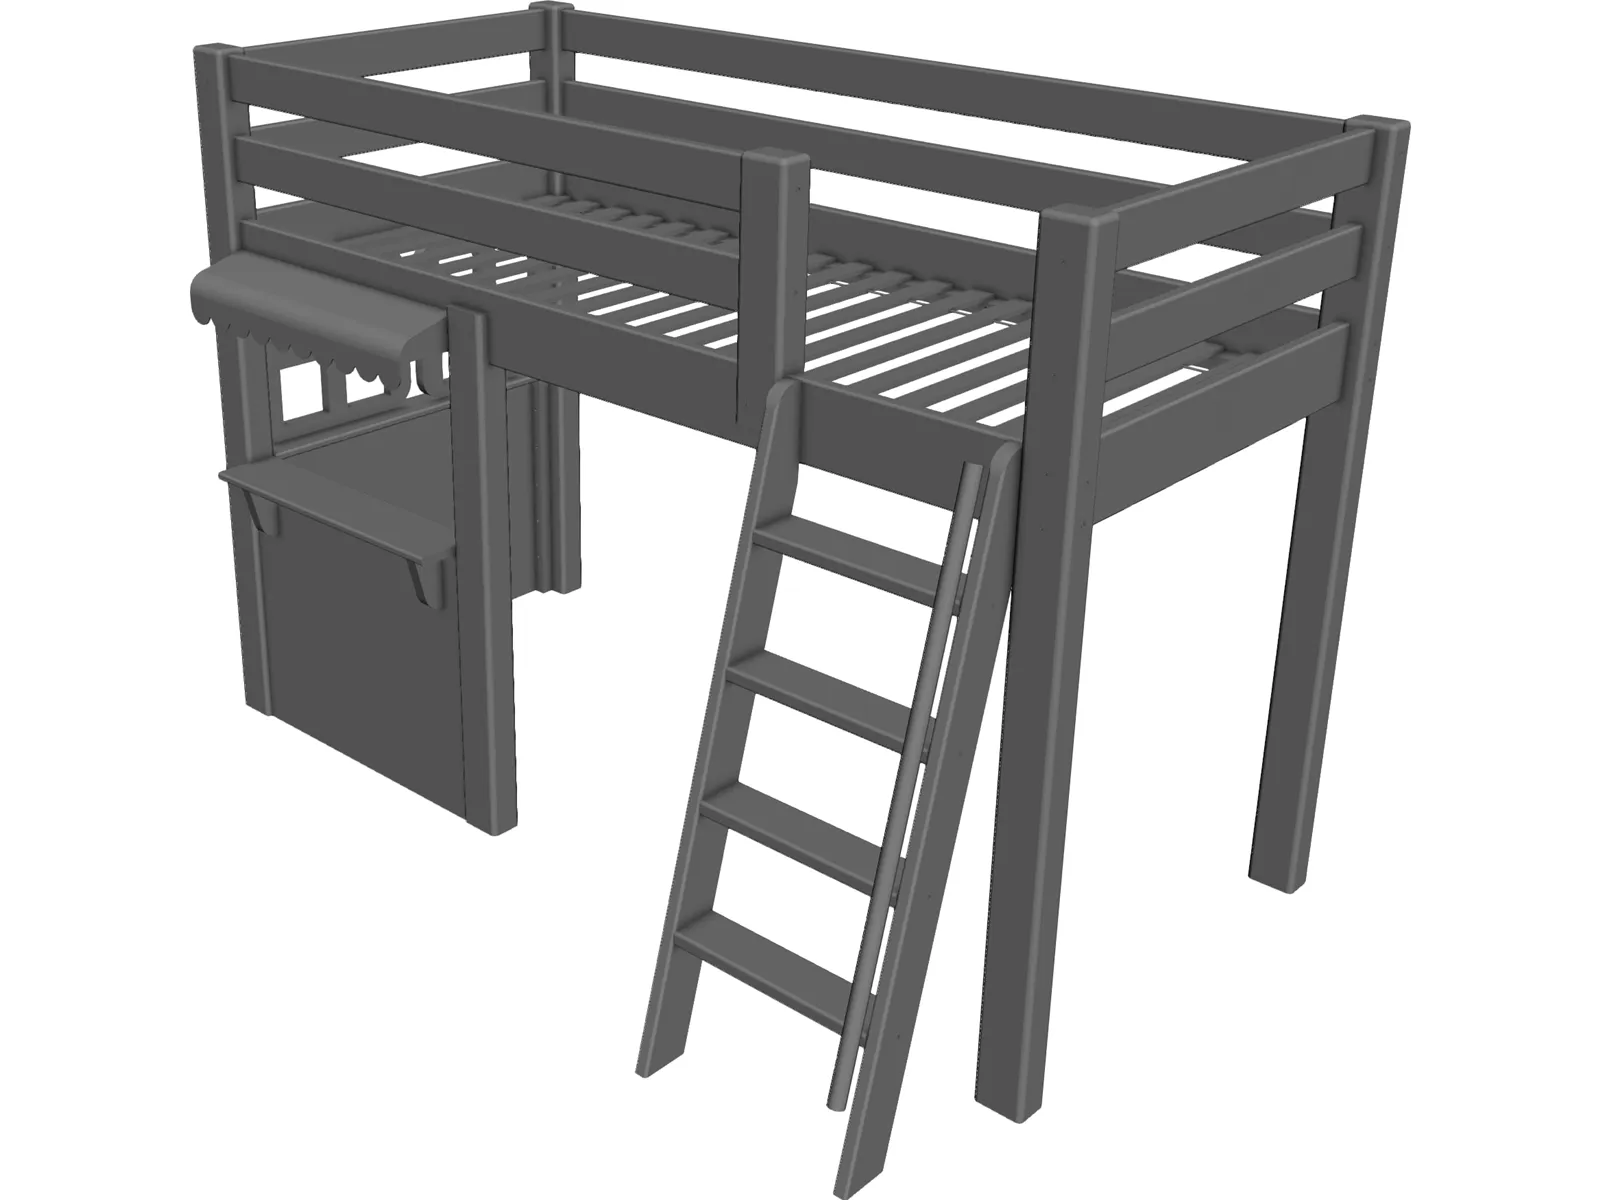 Loft Bed Children with Store CAD Model - 3DCADBrowser